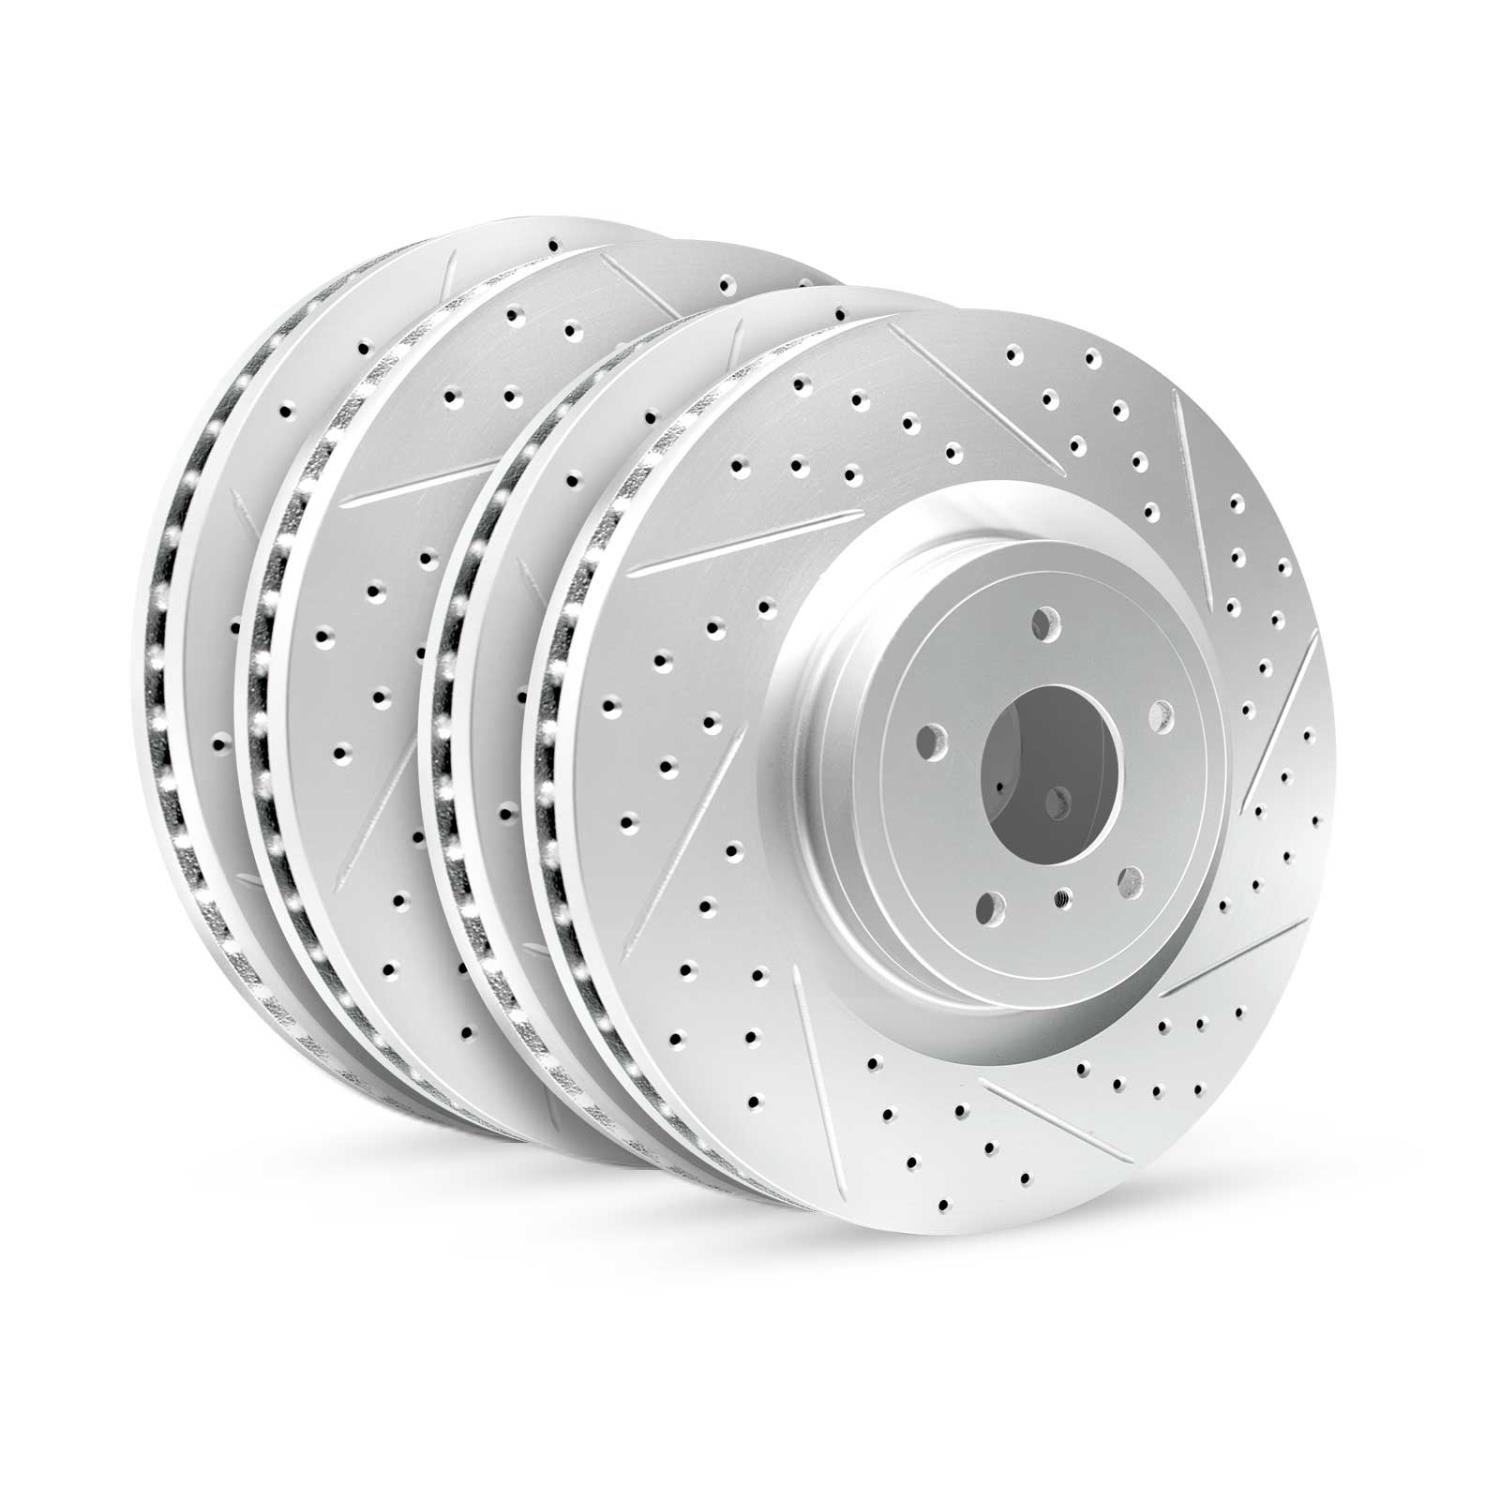 GEO-Carbon Drilled/Slotted Rotors, 2006-2009 Kia/Hyundai/Genesis, Position: Front/Rear